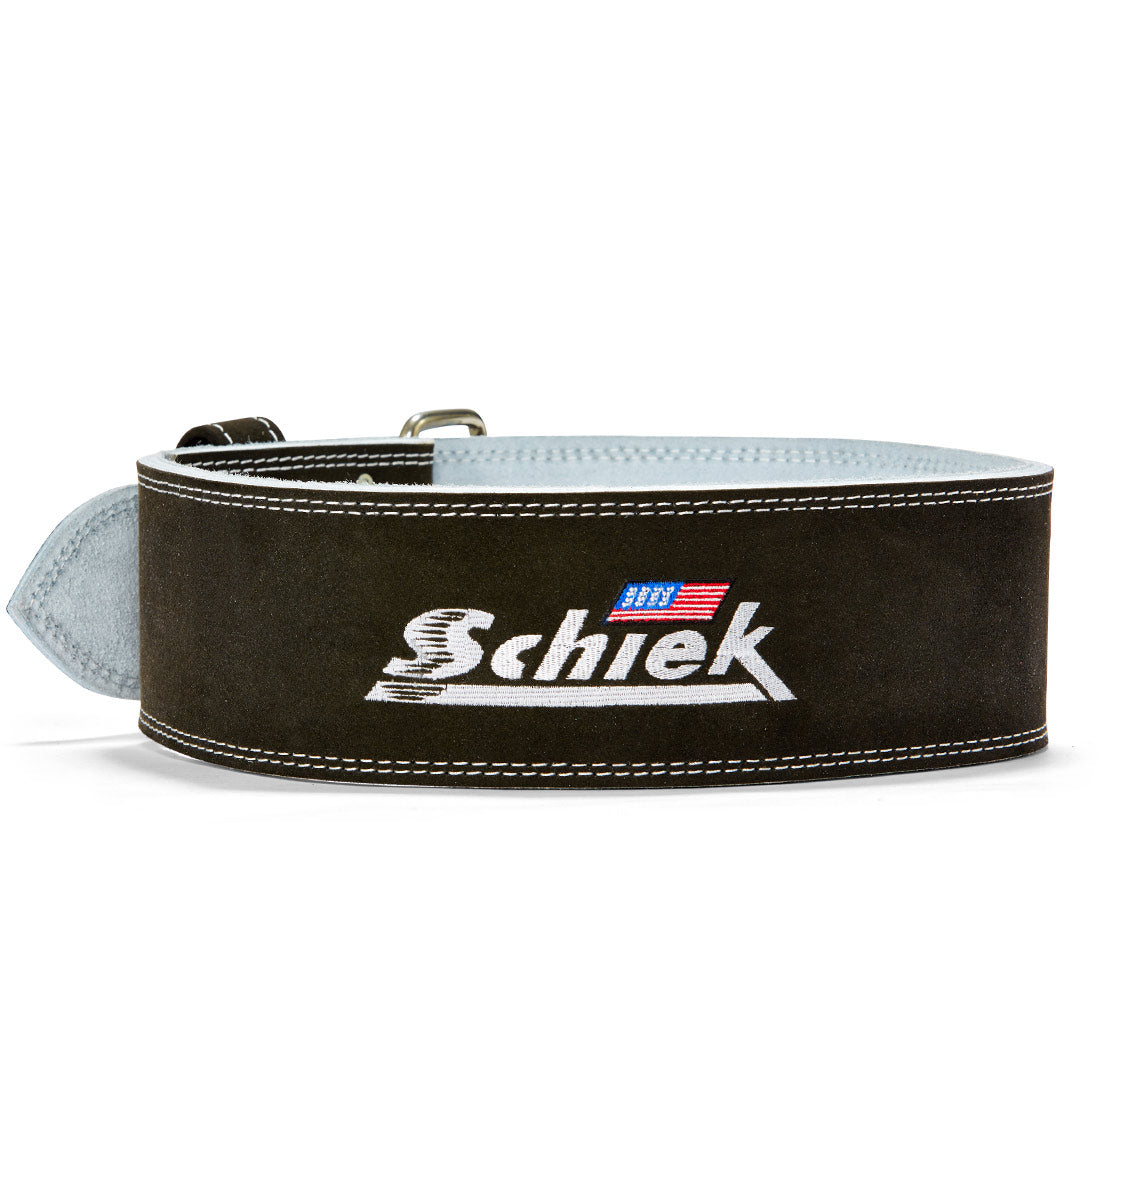 L6010 Schiek Competition Power Weight Lifting Belt Double Prong Back